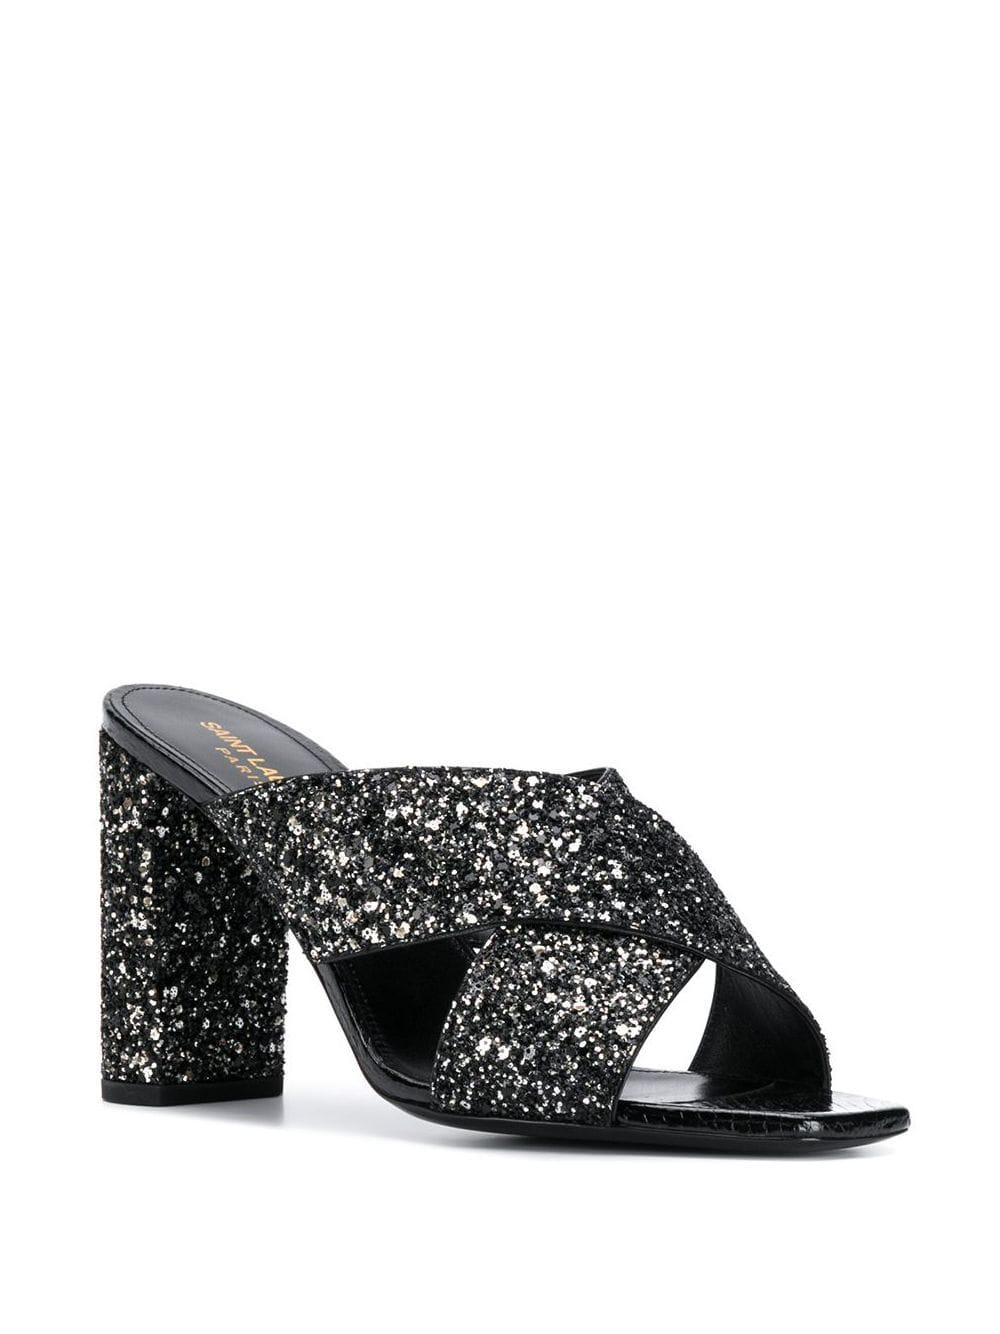 Saint Laurent Loulou Mules In Glitter And Ayers in Black | Lyst